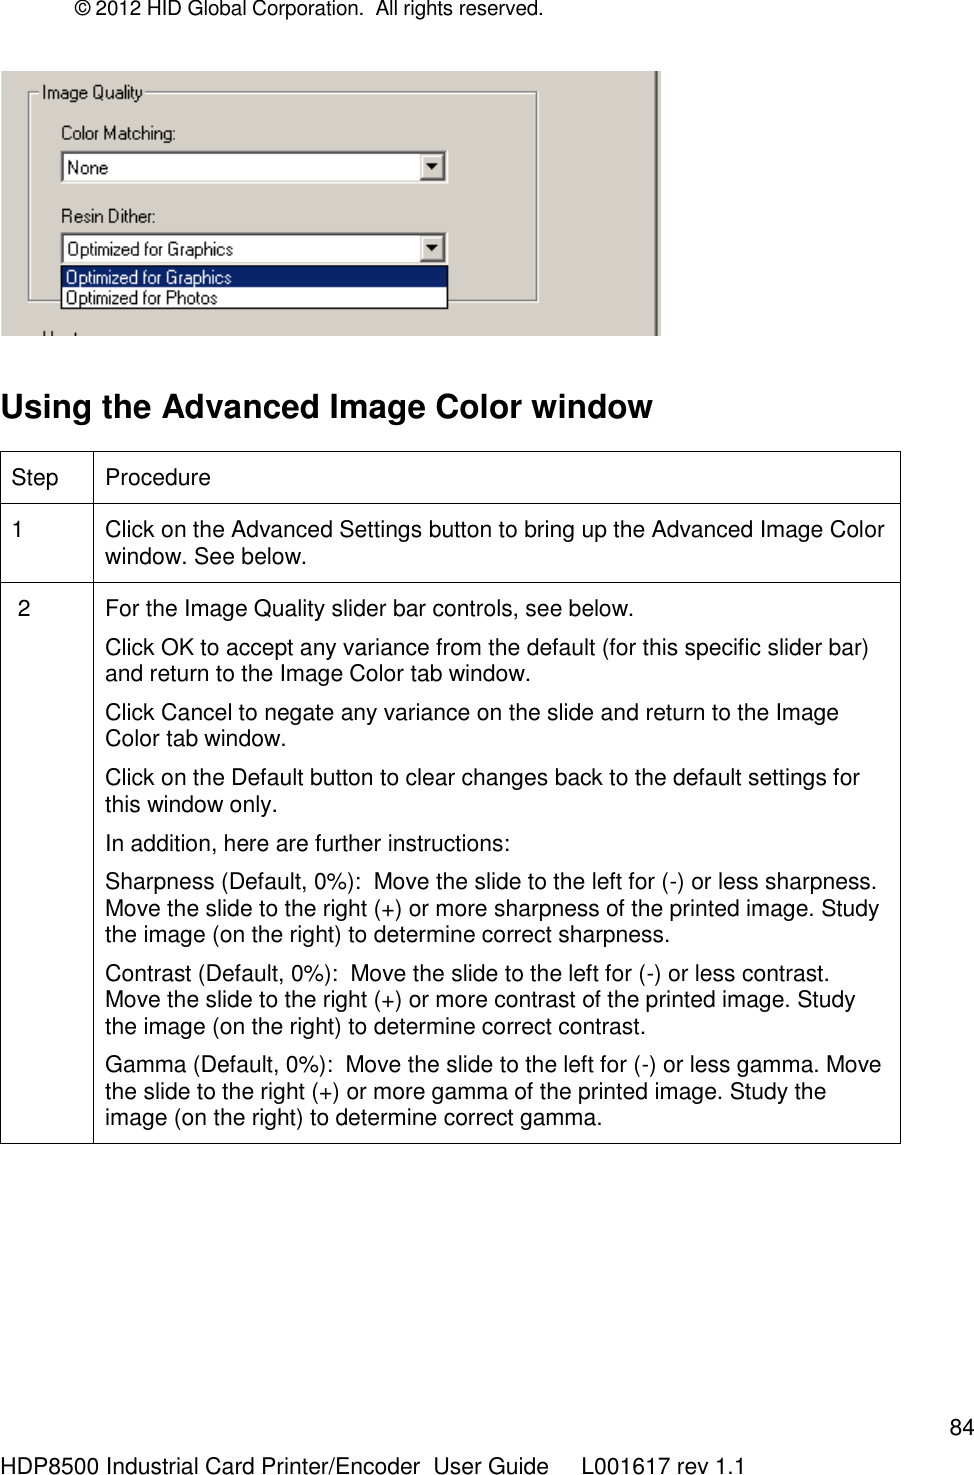 © 2012 HID Global Corporation.  All rights reserved.  84 HDP8500 Industrial Card Printer/Encoder  User Guide     L001617 rev 1.1      Using the Advanced Image Color window  Step Procedure 1 Click on the Advanced Settings button to bring up the Advanced Image Color window. See below.  2 For the Image Quality slider bar controls, see below.  Click OK to accept any variance from the default (for this specific slider bar) and return to the Image Color tab window.  Click Cancel to negate any variance on the slide and return to the Image Color tab window.  Click on the Default button to clear changes back to the default settings for this window only. In addition, here are further instructions: Sharpness (Default, 0%):  Move the slide to the left for (-) or less sharpness. Move the slide to the right (+) or more sharpness of the printed image. Study the image (on the right) to determine correct sharpness.  Contrast (Default, 0%):  Move the slide to the left for (-) or less contrast. Move the slide to the right (+) or more contrast of the printed image. Study the image (on the right) to determine correct contrast.  Gamma (Default, 0%):  Move the slide to the left for (-) or less gamma. Move the slide to the right (+) or more gamma of the printed image. Study the image (on the right) to determine correct gamma.   